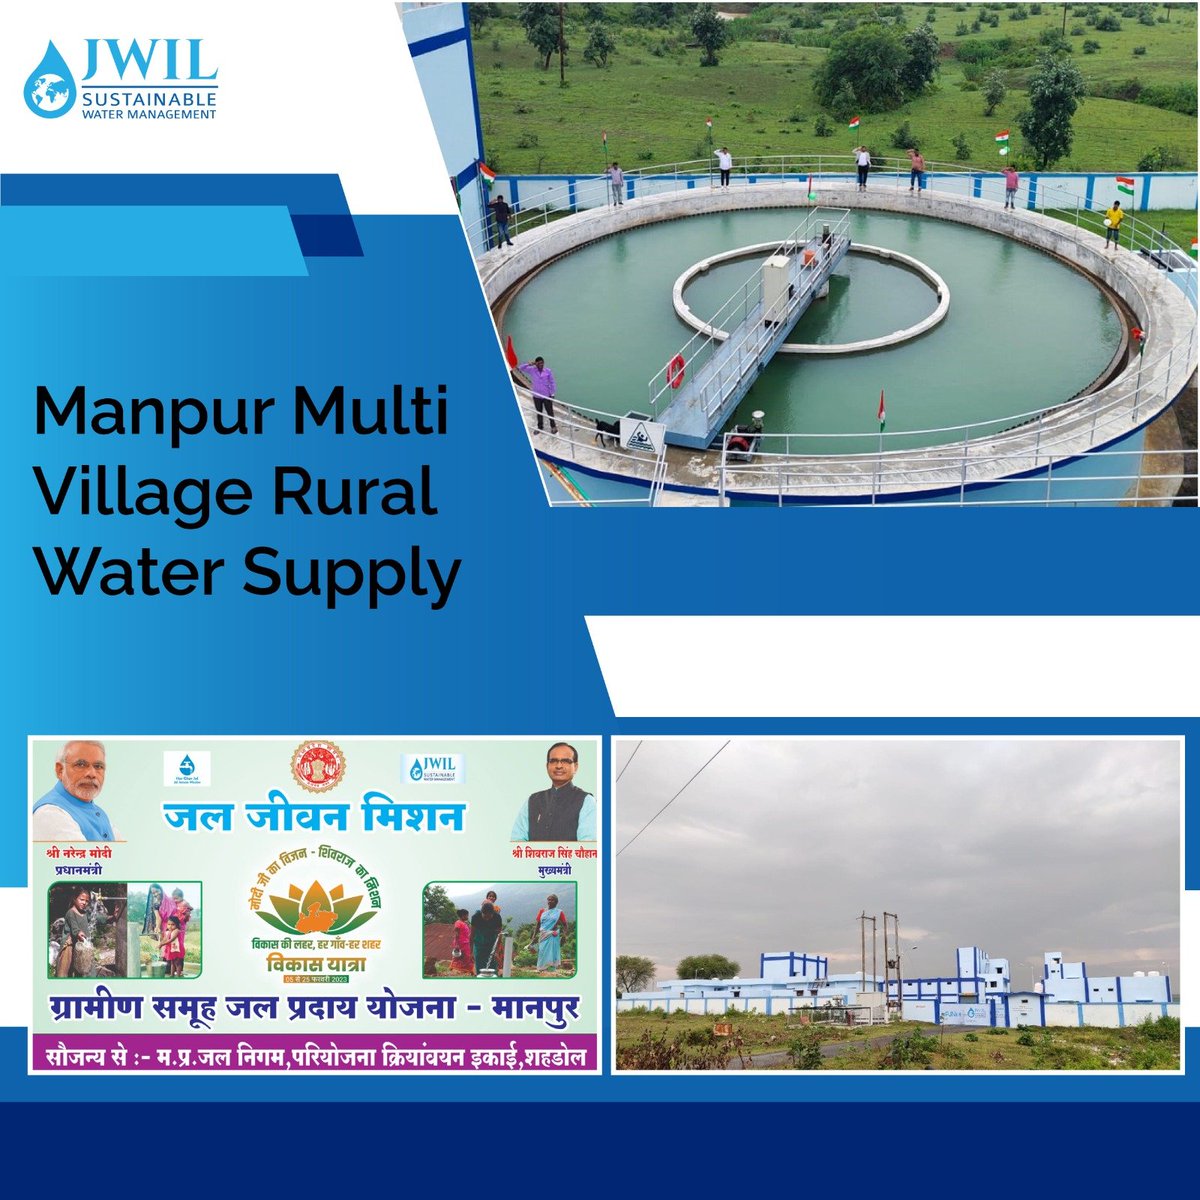 “Delivering our promise - Bringing treated water from the source son river block Manpur to villages for water demand!”

#operationandmaintenance #waterforall #watermanagement #deliveringhappiness #JWIL